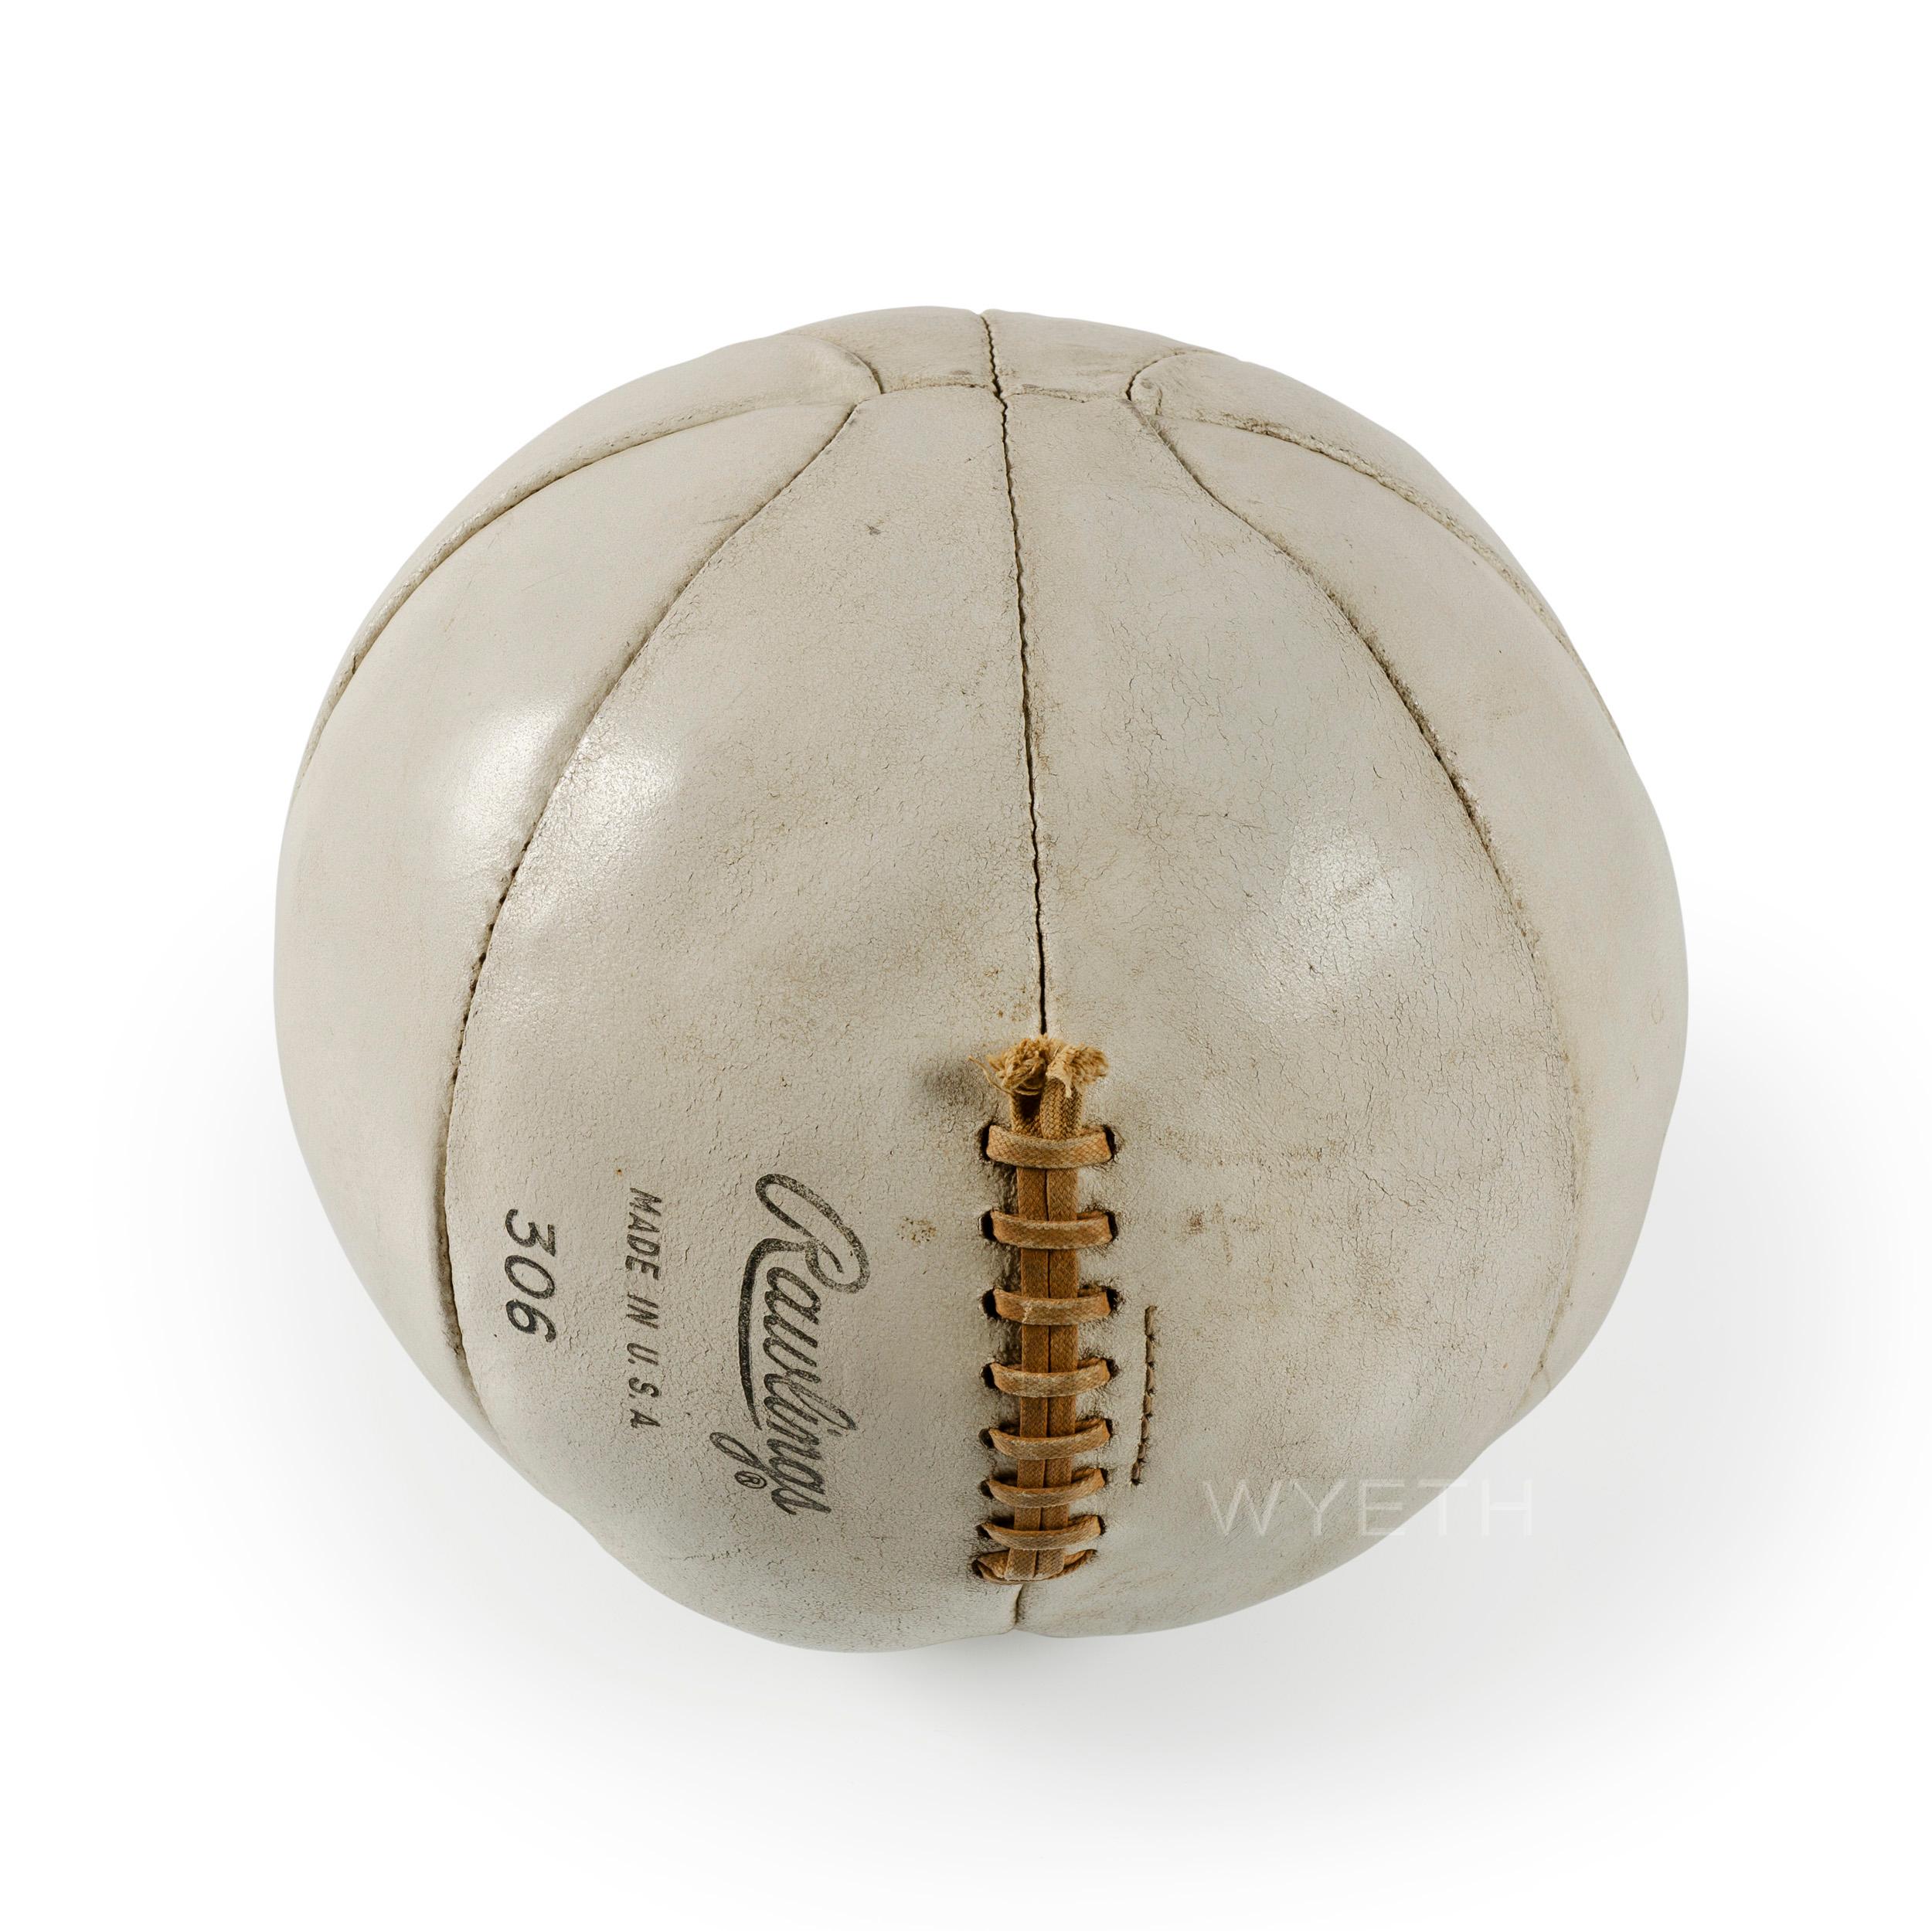 Original Model 306 A white leather medicine ball by Rawlings U.S.A. Inc. Manufactured in the 1950s.